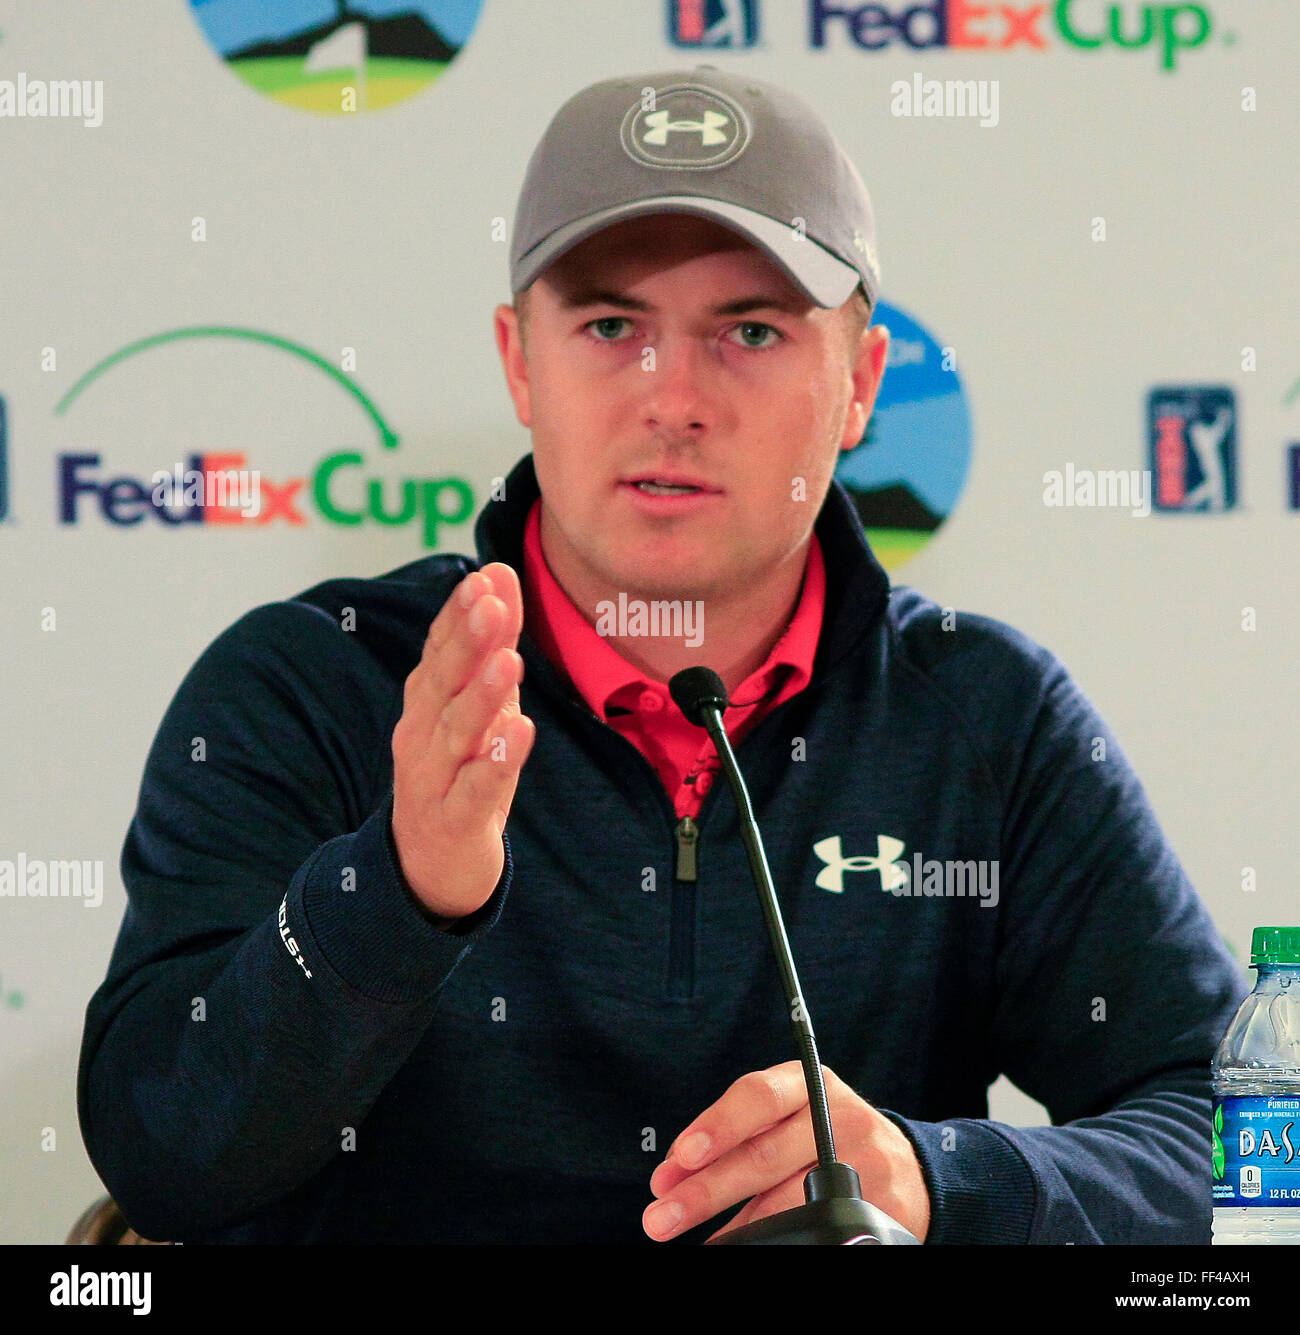 Jordan Spieth, (Texas) the World No.1 golfer talks with the press at the AT&T Pro-Am PGA Tour golf event at Pebble Beach CA, USA Stock Photo